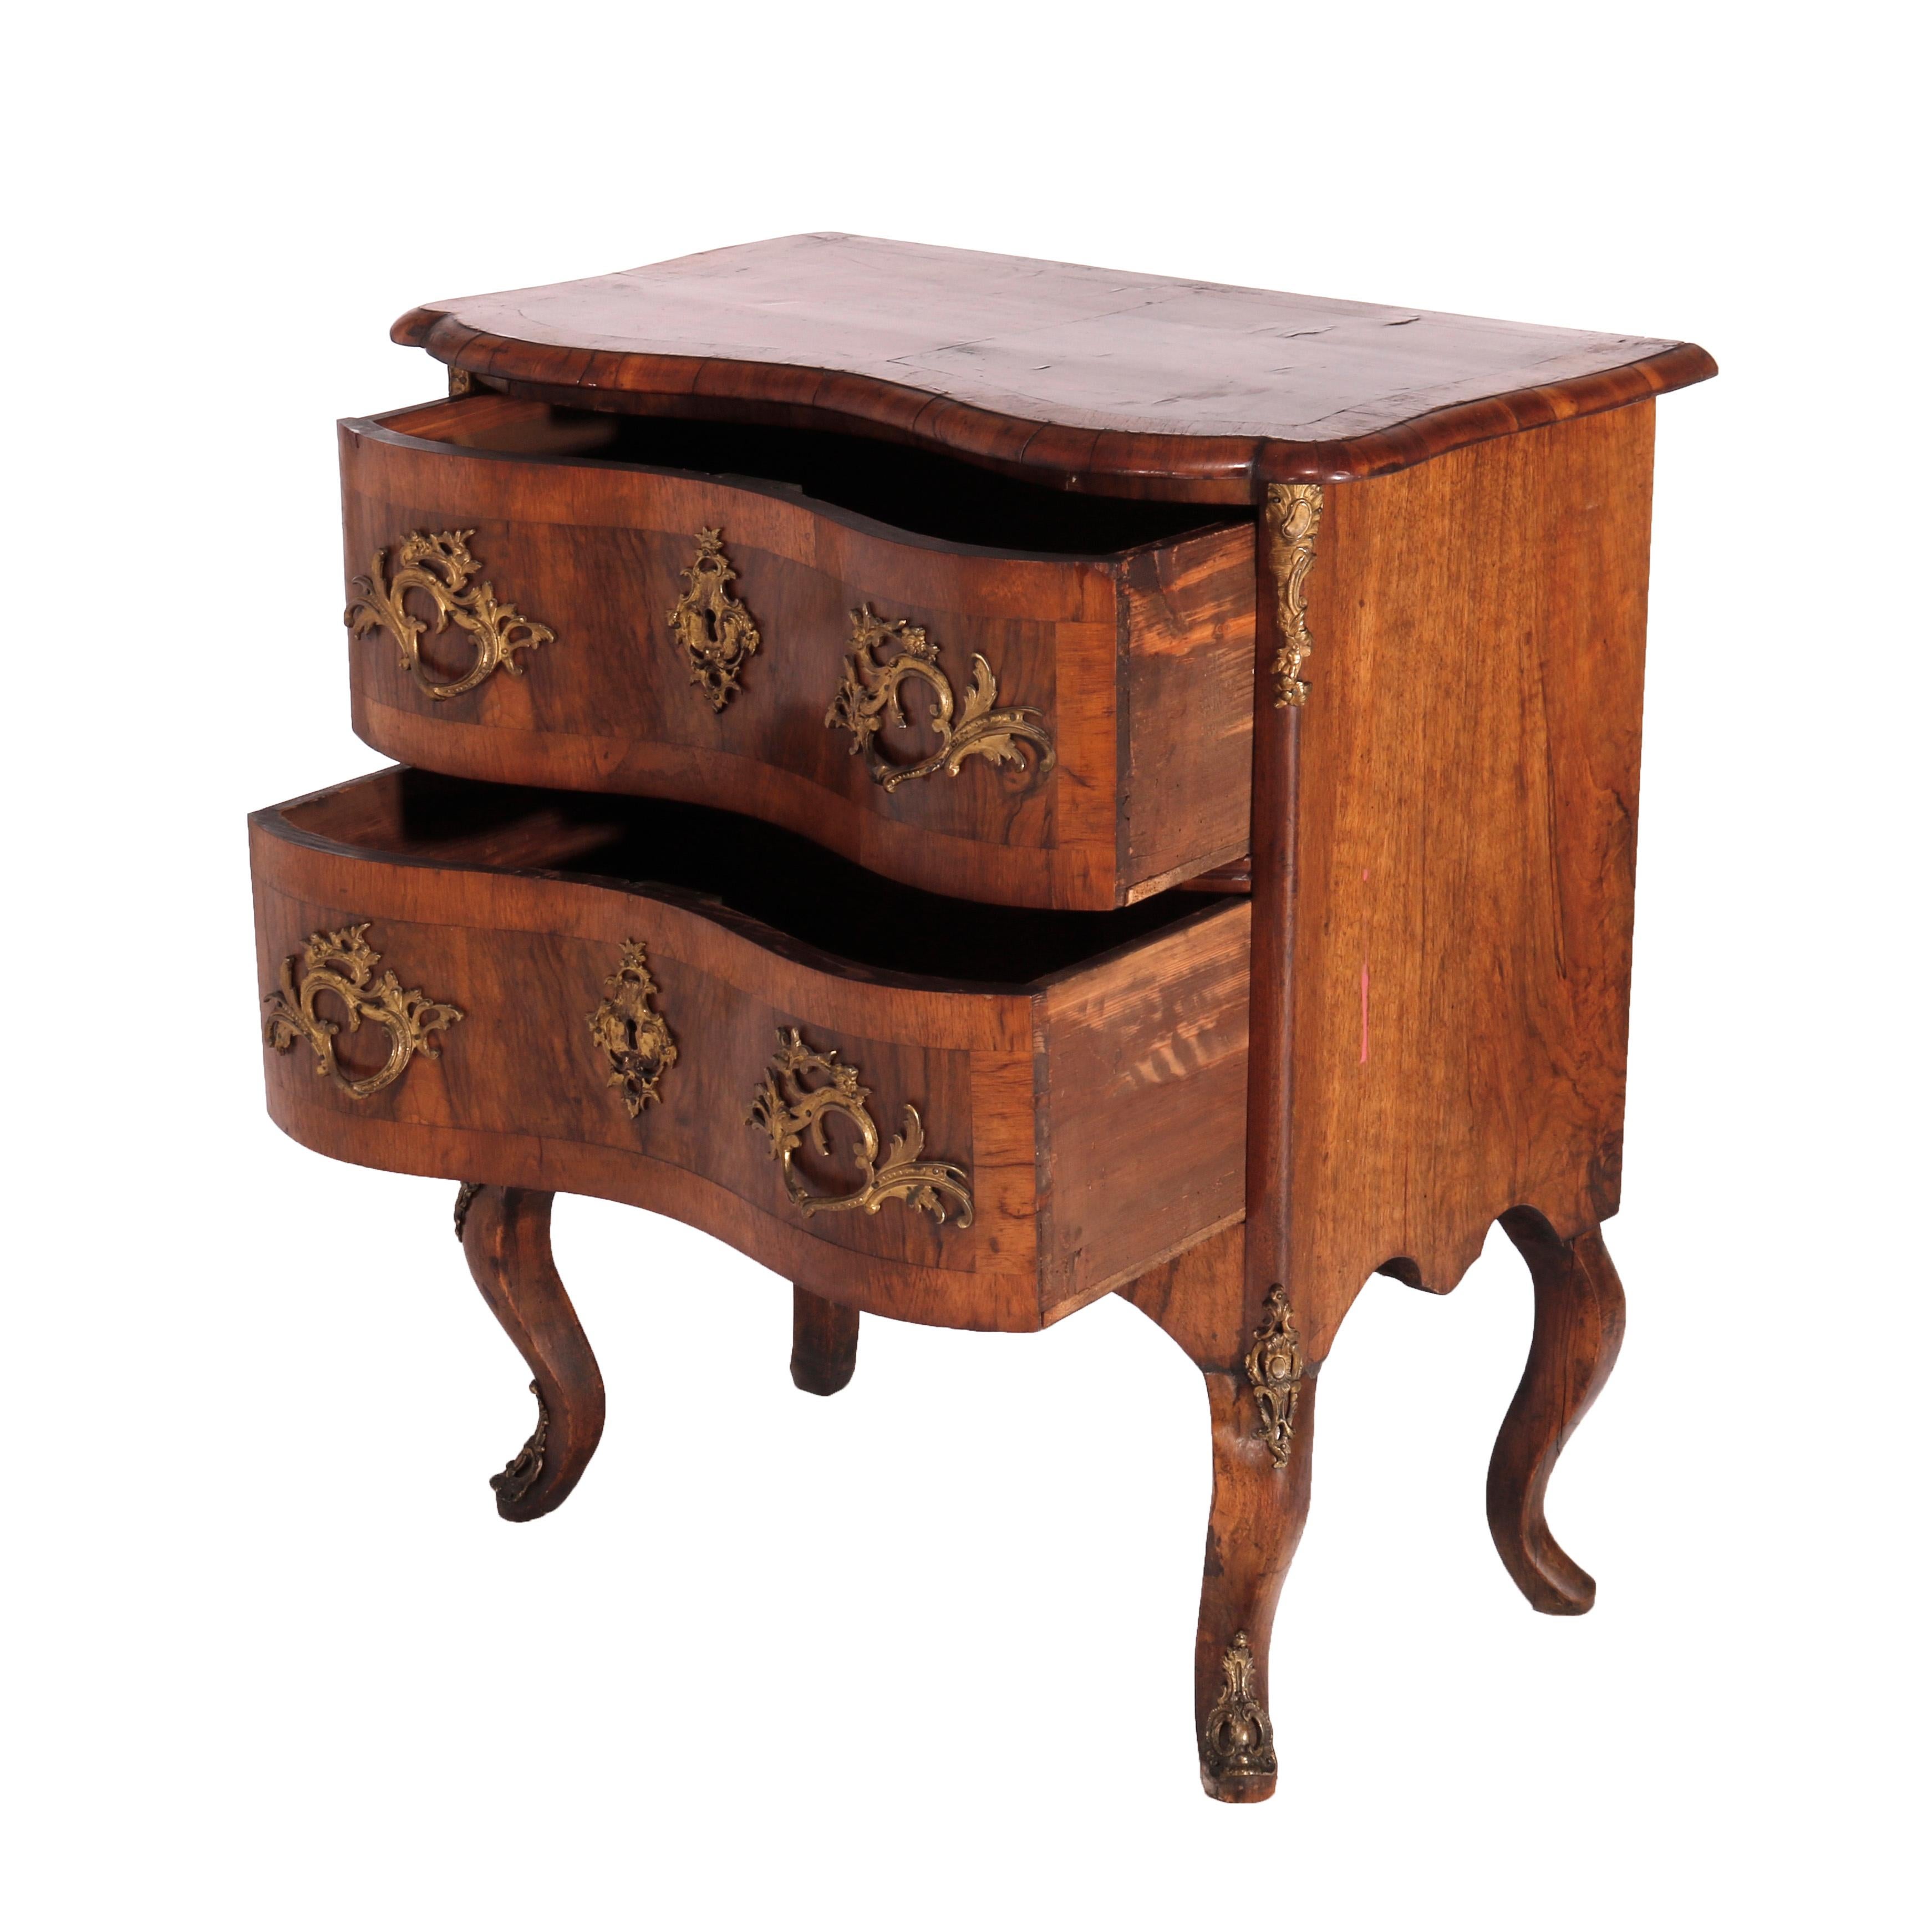 An antique Italian side chest offers kingwood construction with satinwood inlay having shaped top over serpentine case with two crossbanded drawers, raised on cabriole legs; cast ormolu mounts throughout, late 18th century

Measures - 31.5